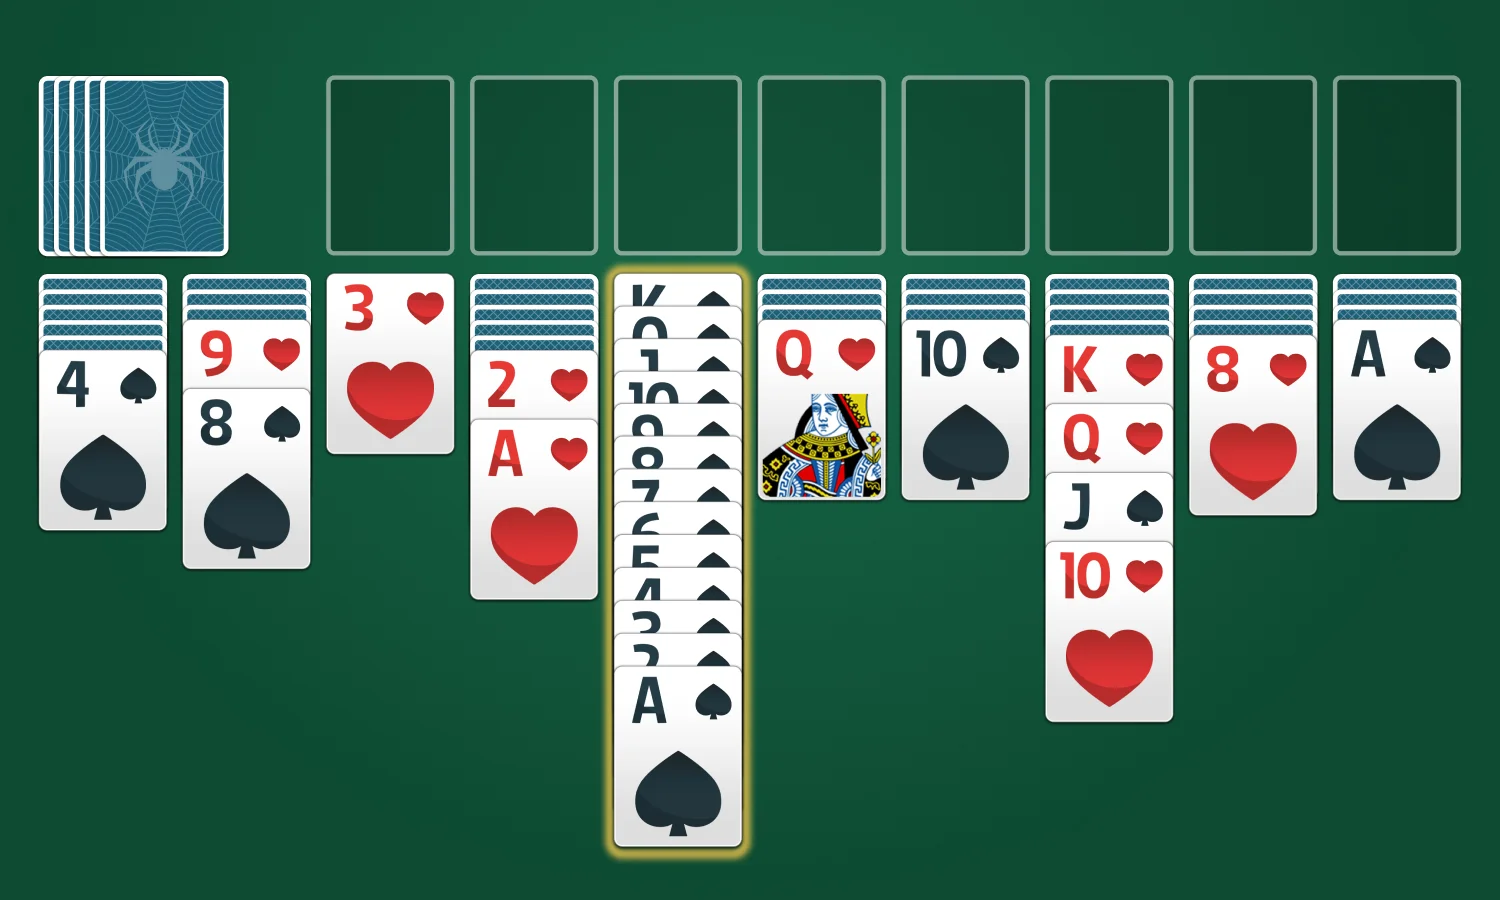 Spider Solitaire Rules: Form Same-suit Card Sequences